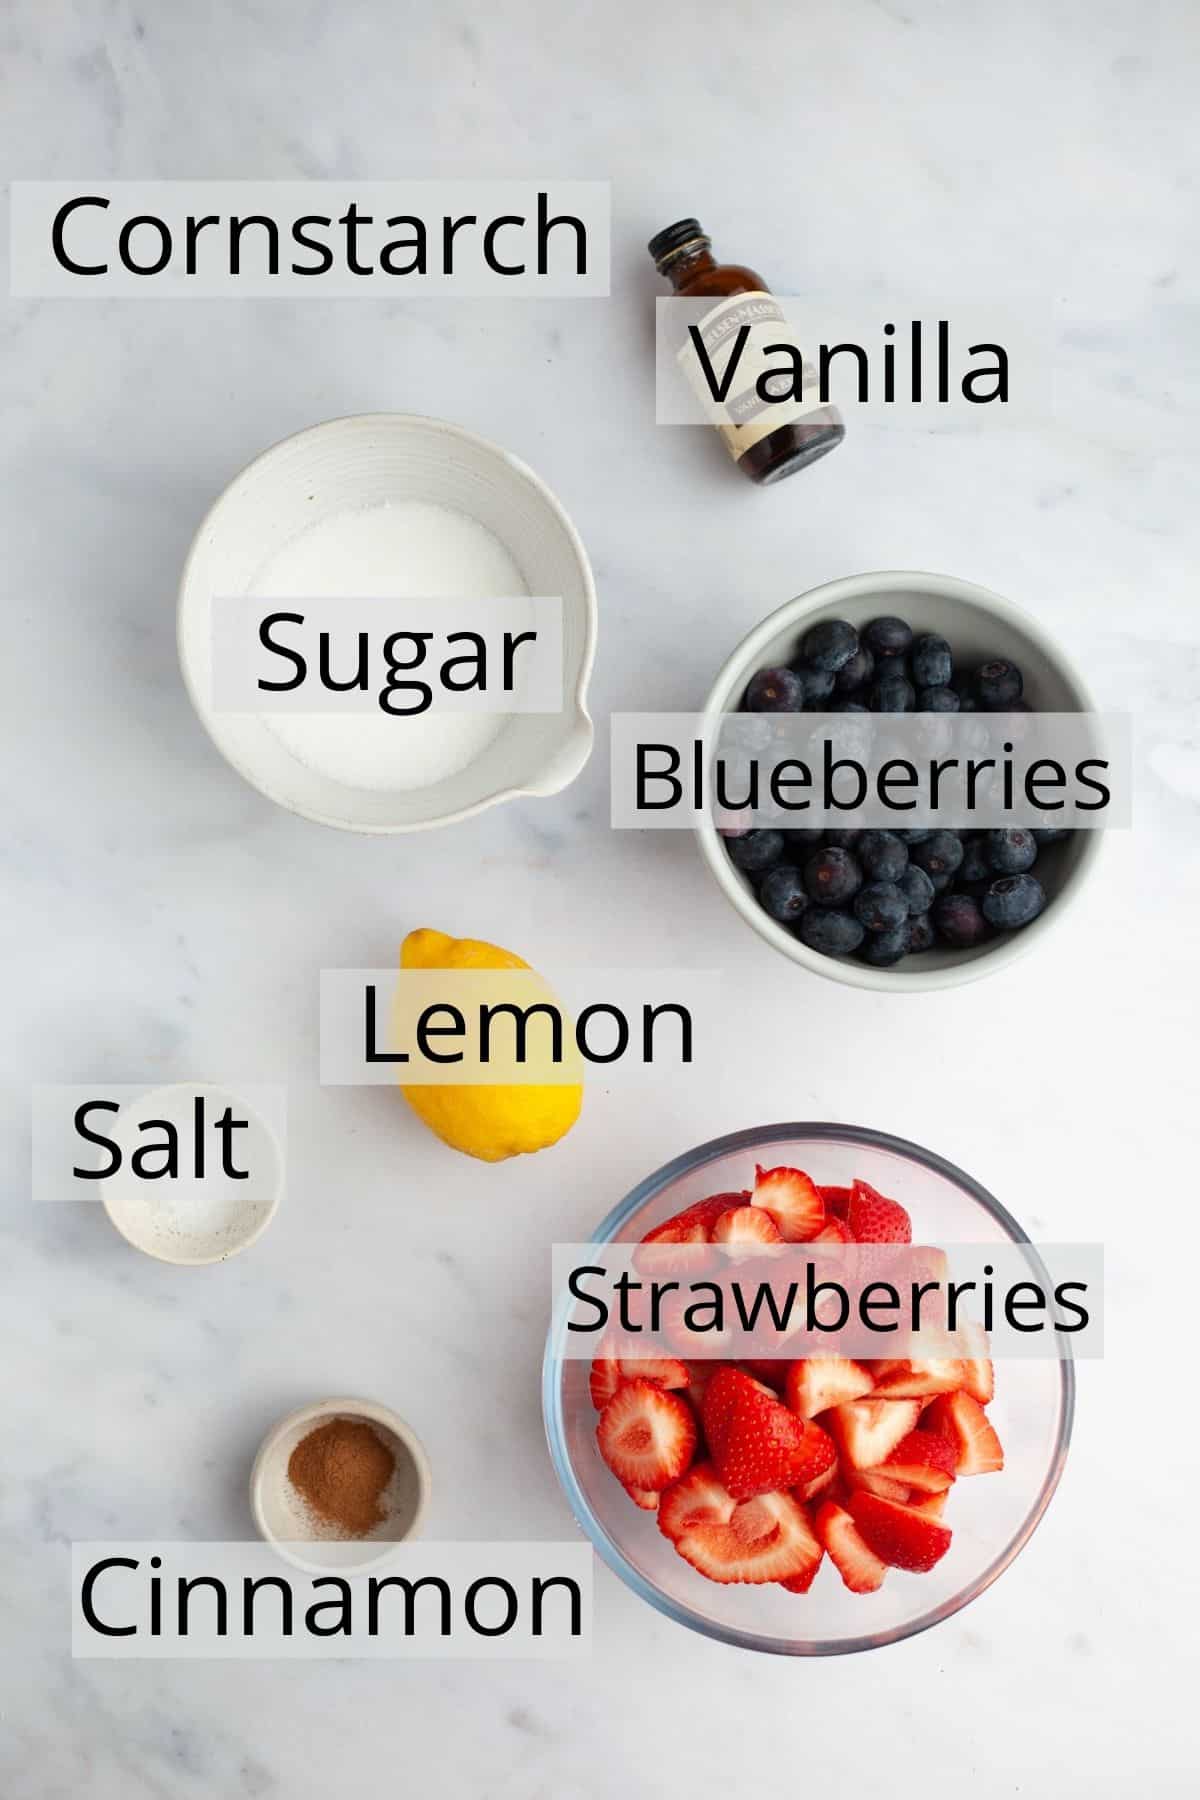 All the ingredients needed for a strawberry blueberry pie filling weighed out into small bowls.